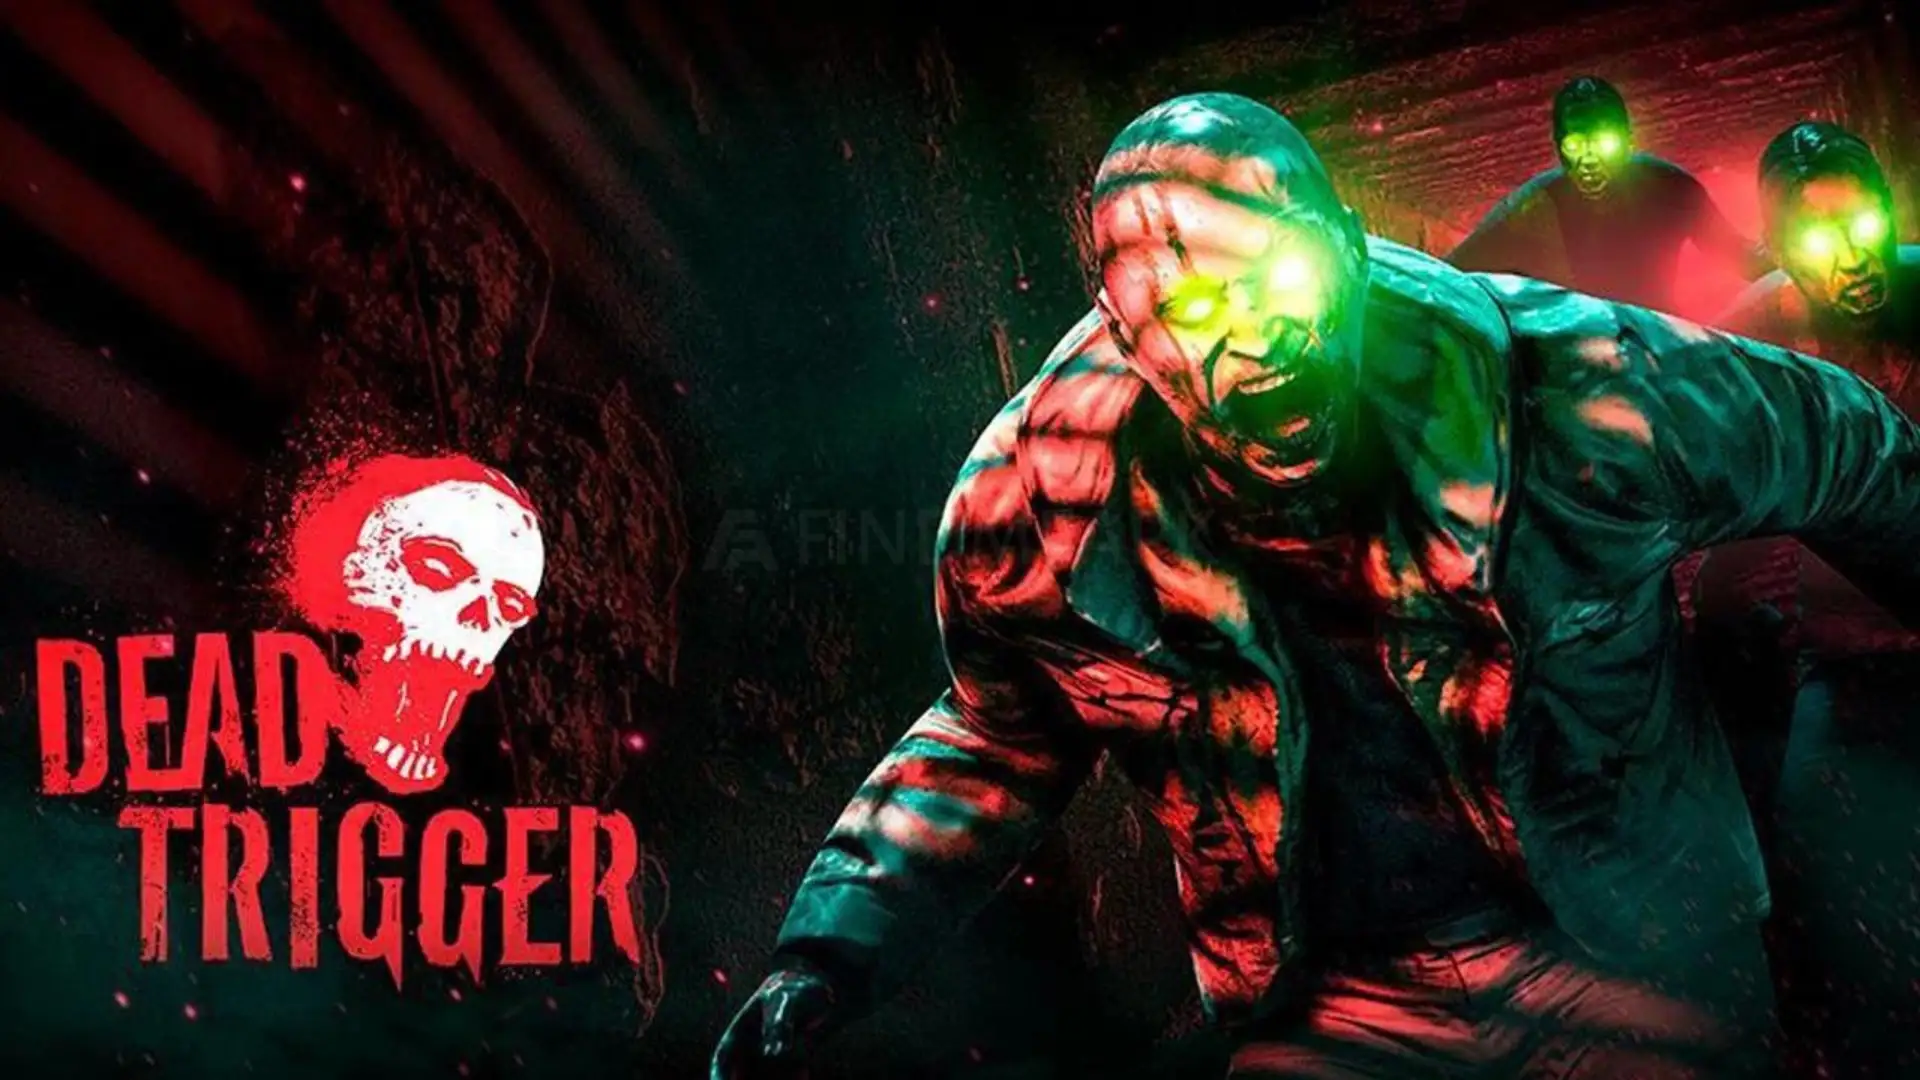 Dead Trigger feature image